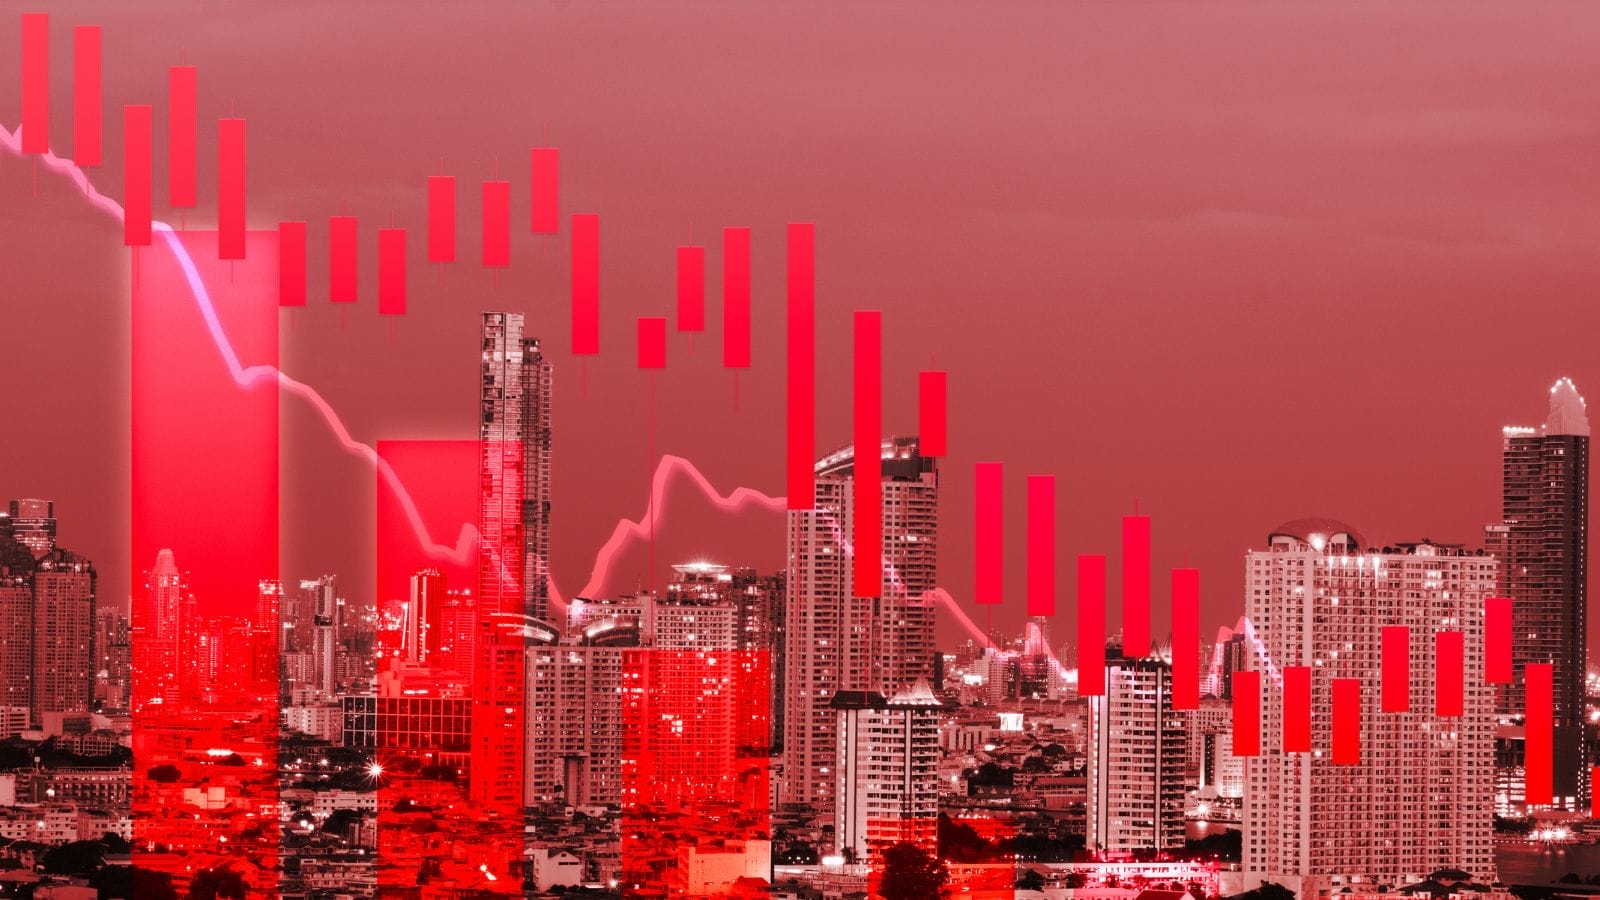 A city skyline with red graph

